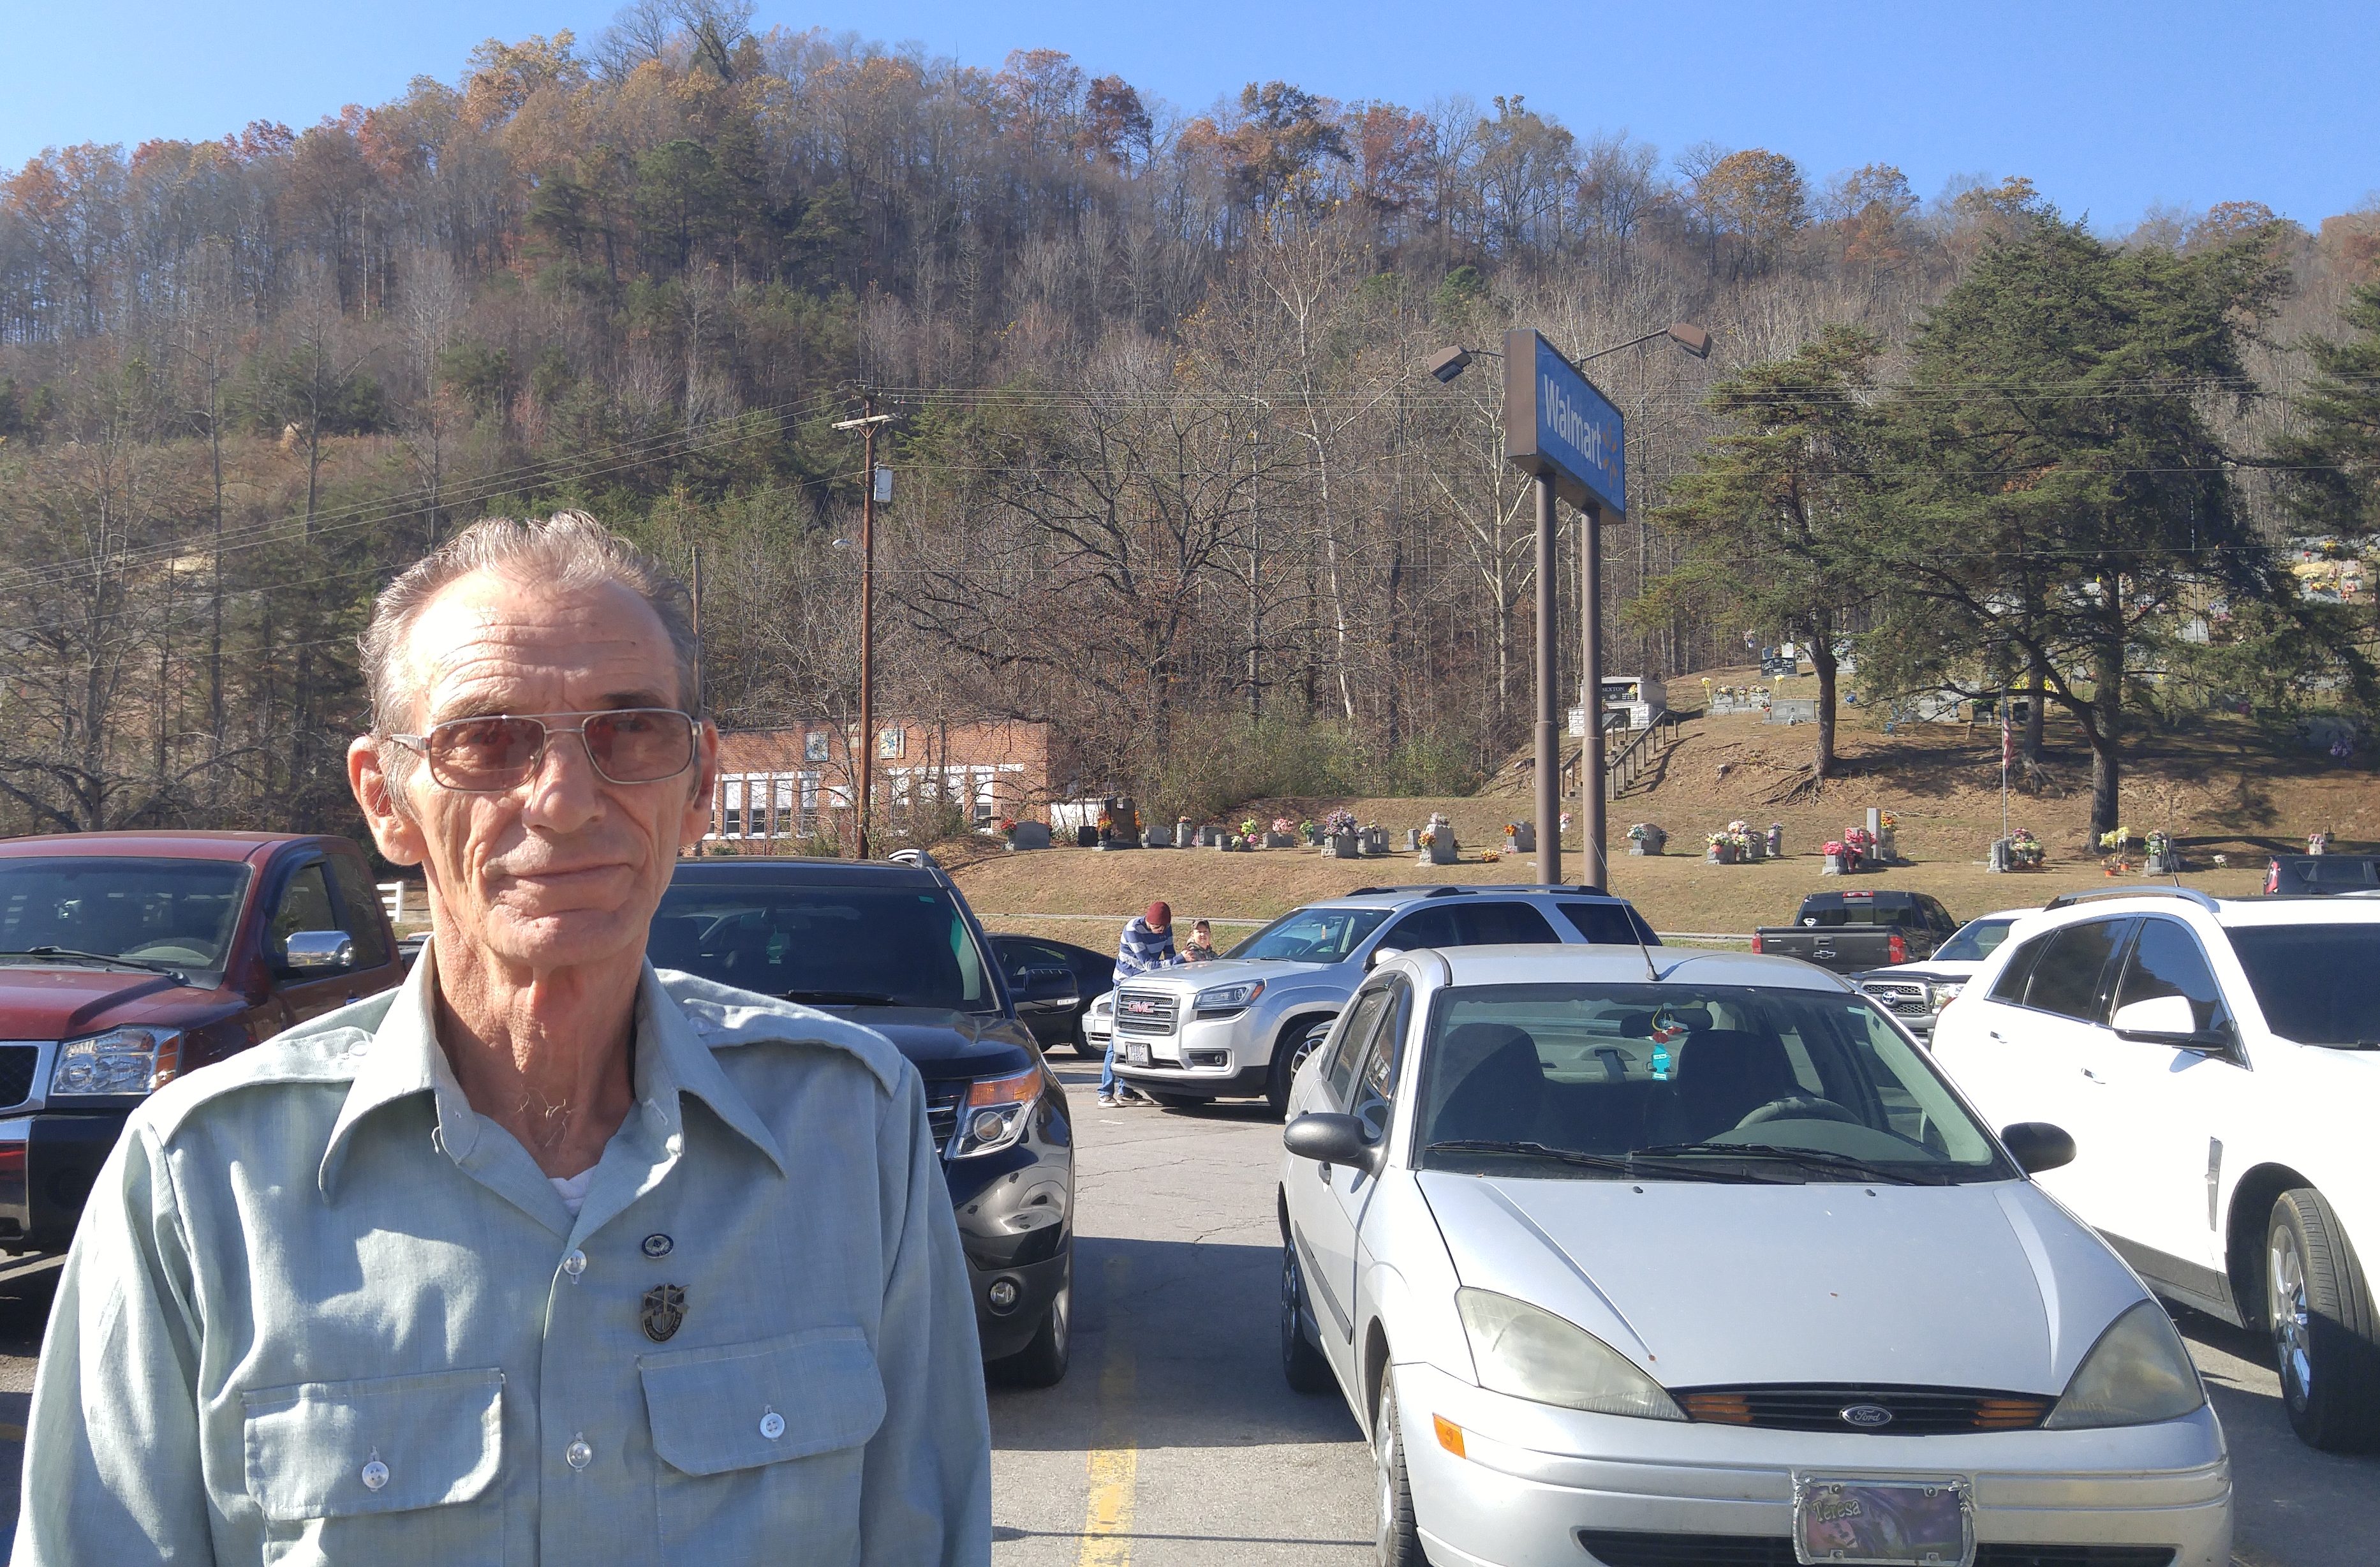 David Boggs of Cumberland, Kentucky: “He’ll put the coal business back together." 